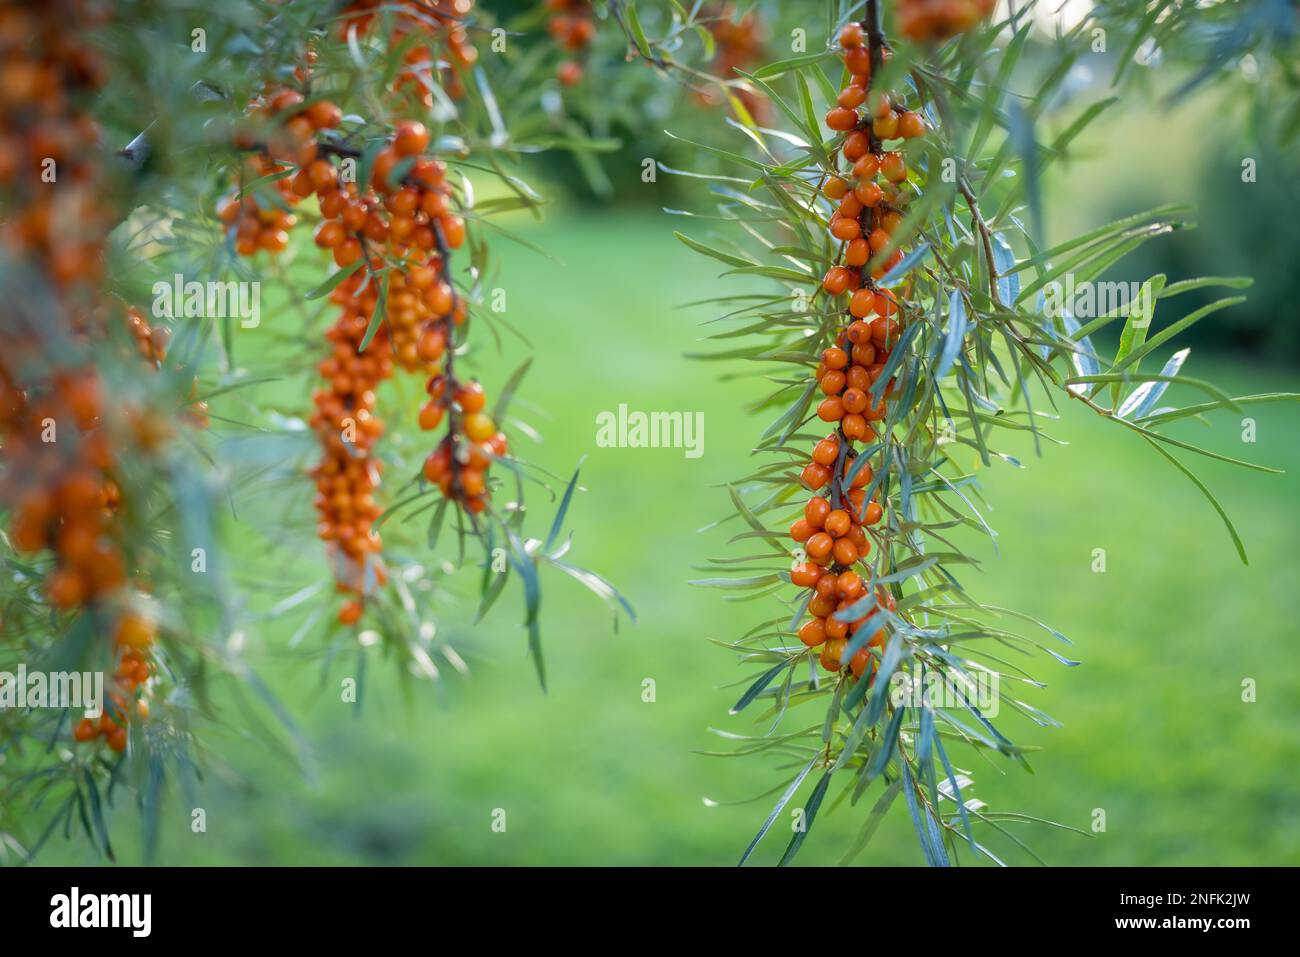 Sea buckthorn berries, sometimes referred to as lemon of the North, are a small, orange berry. Stock Photo